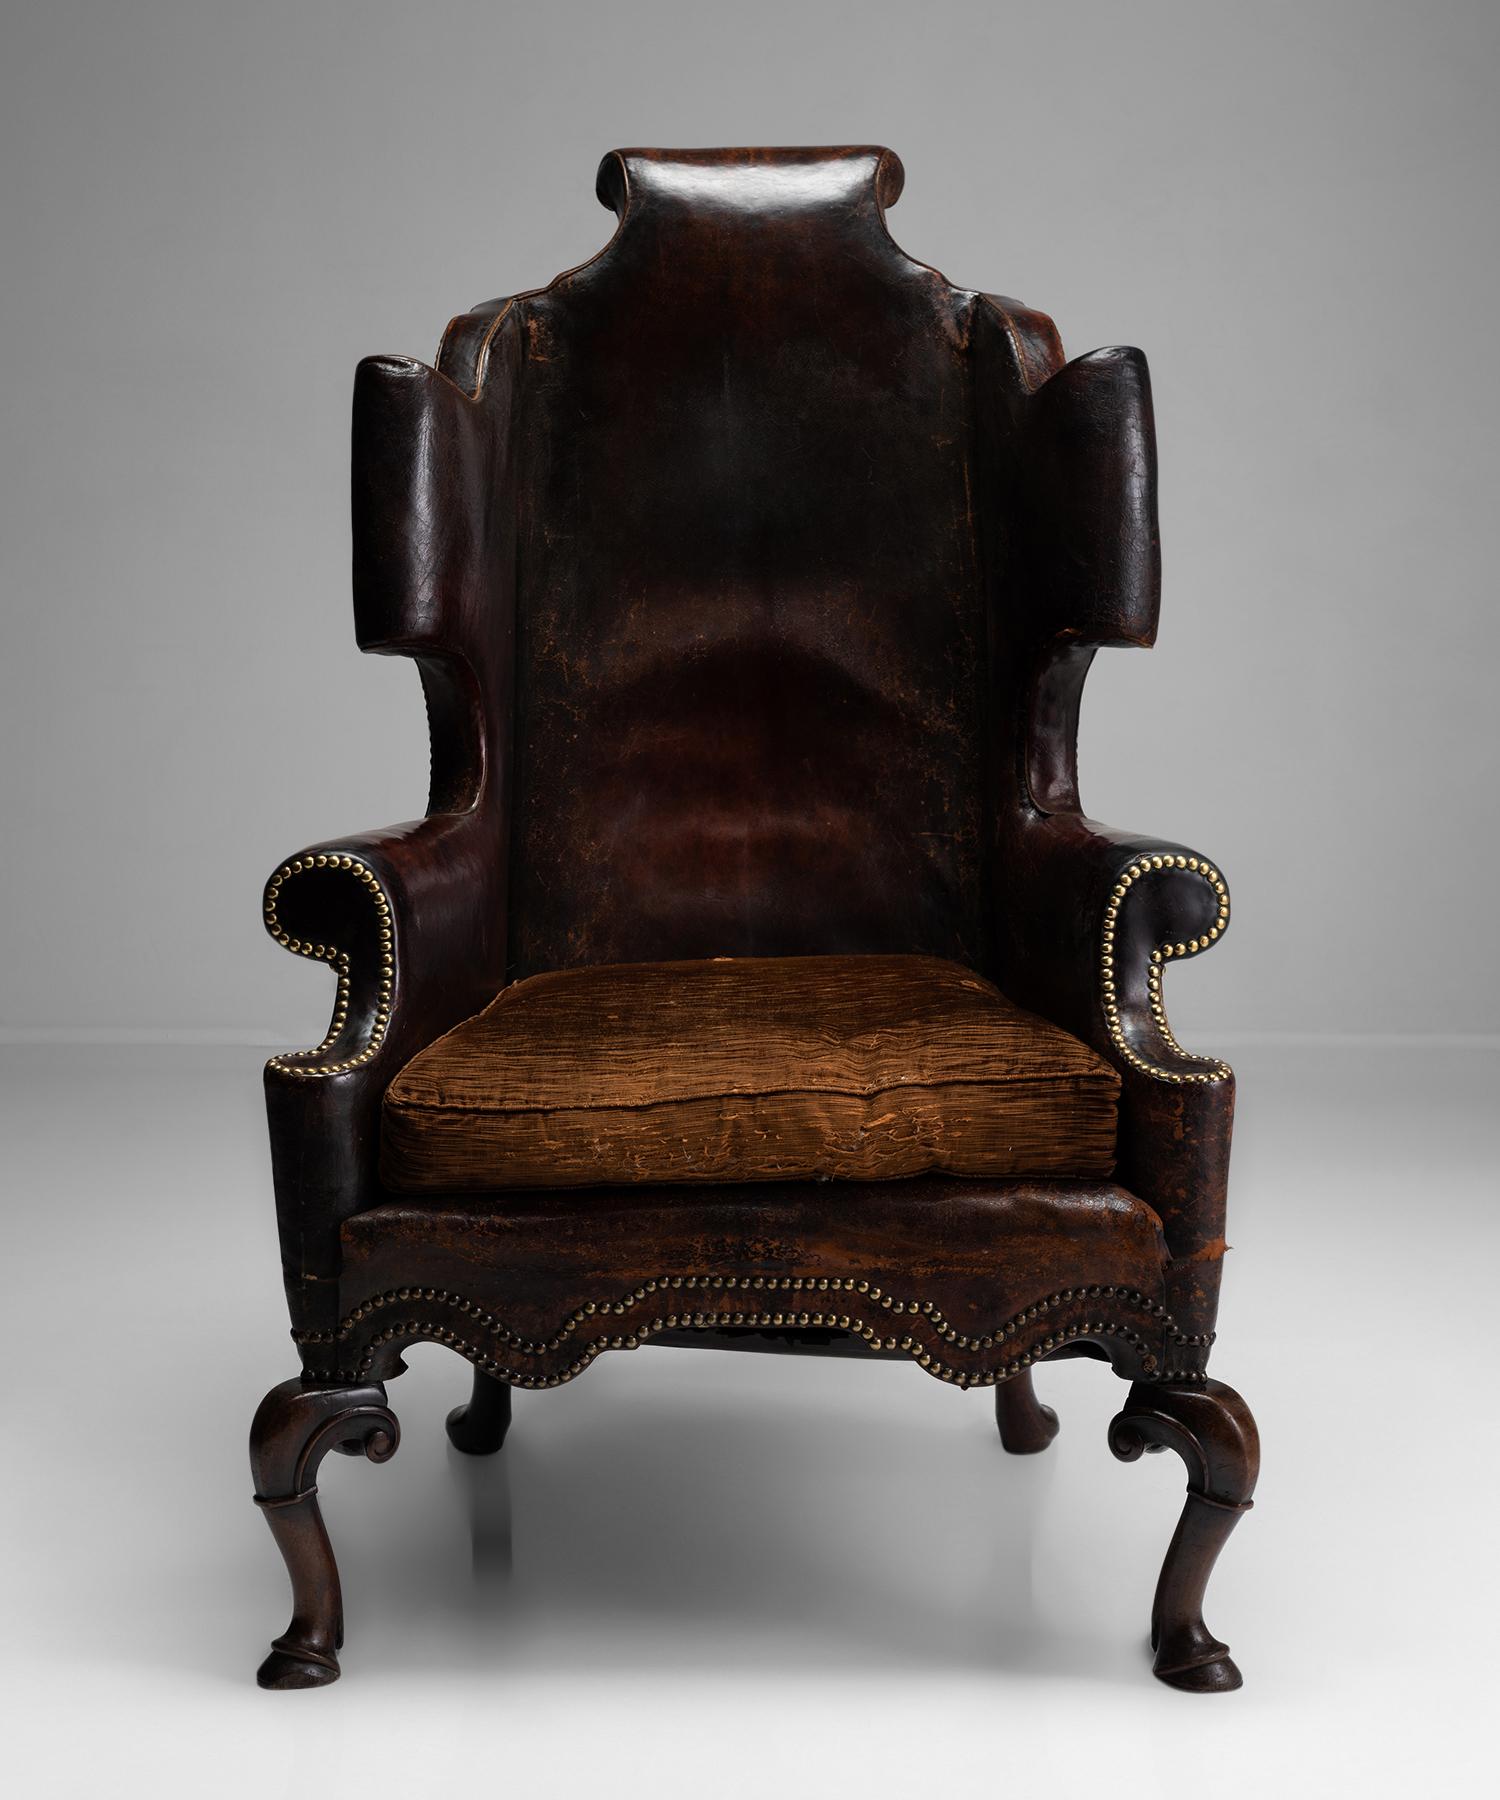 Hand-Carved Monumental Leather Wingback Chair